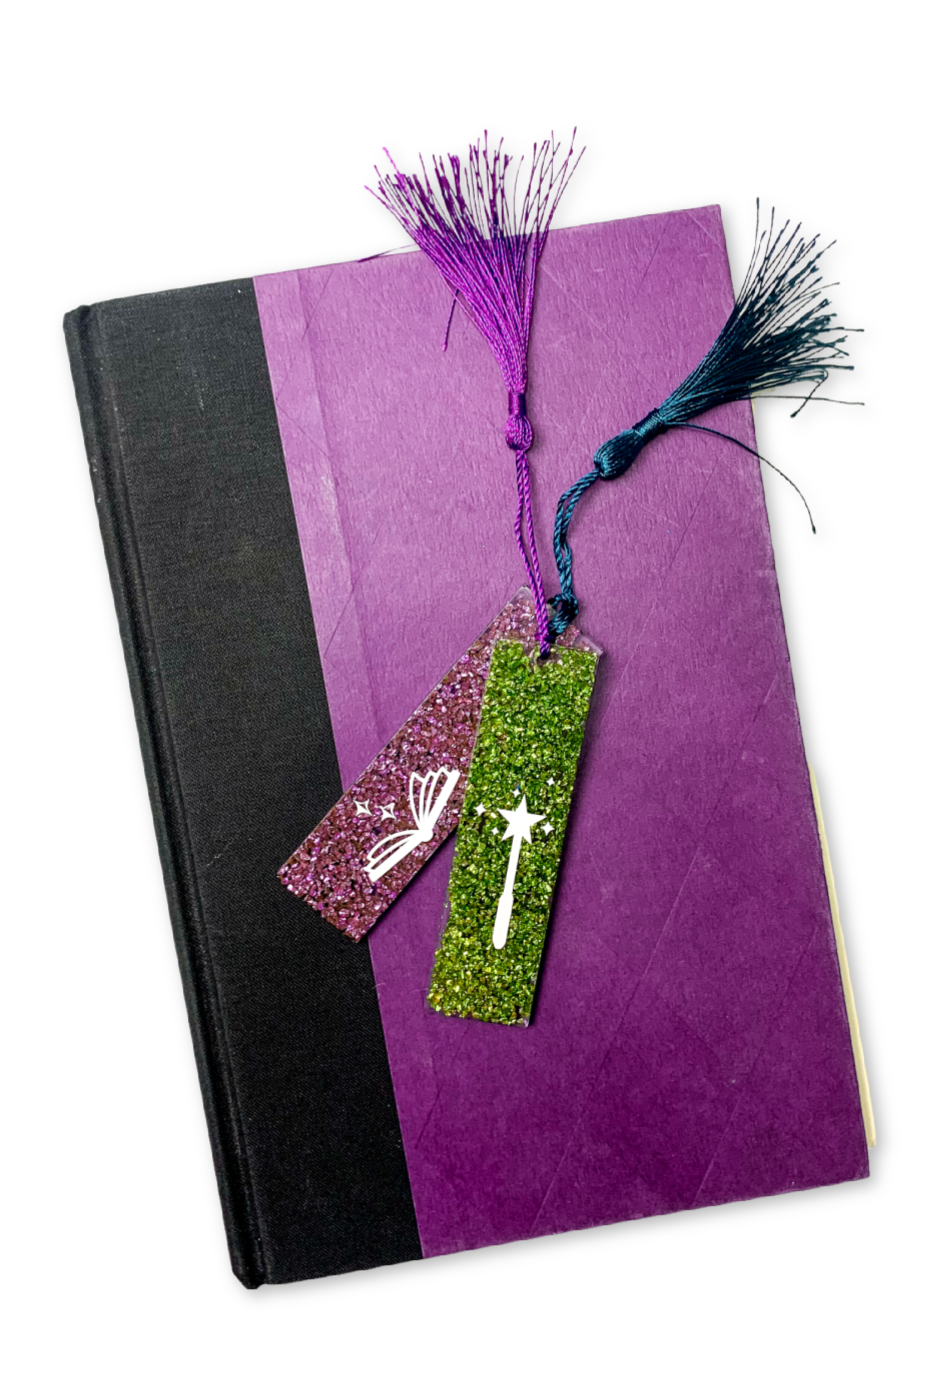 Resin bookmarks with tassels on a purple hardcover book